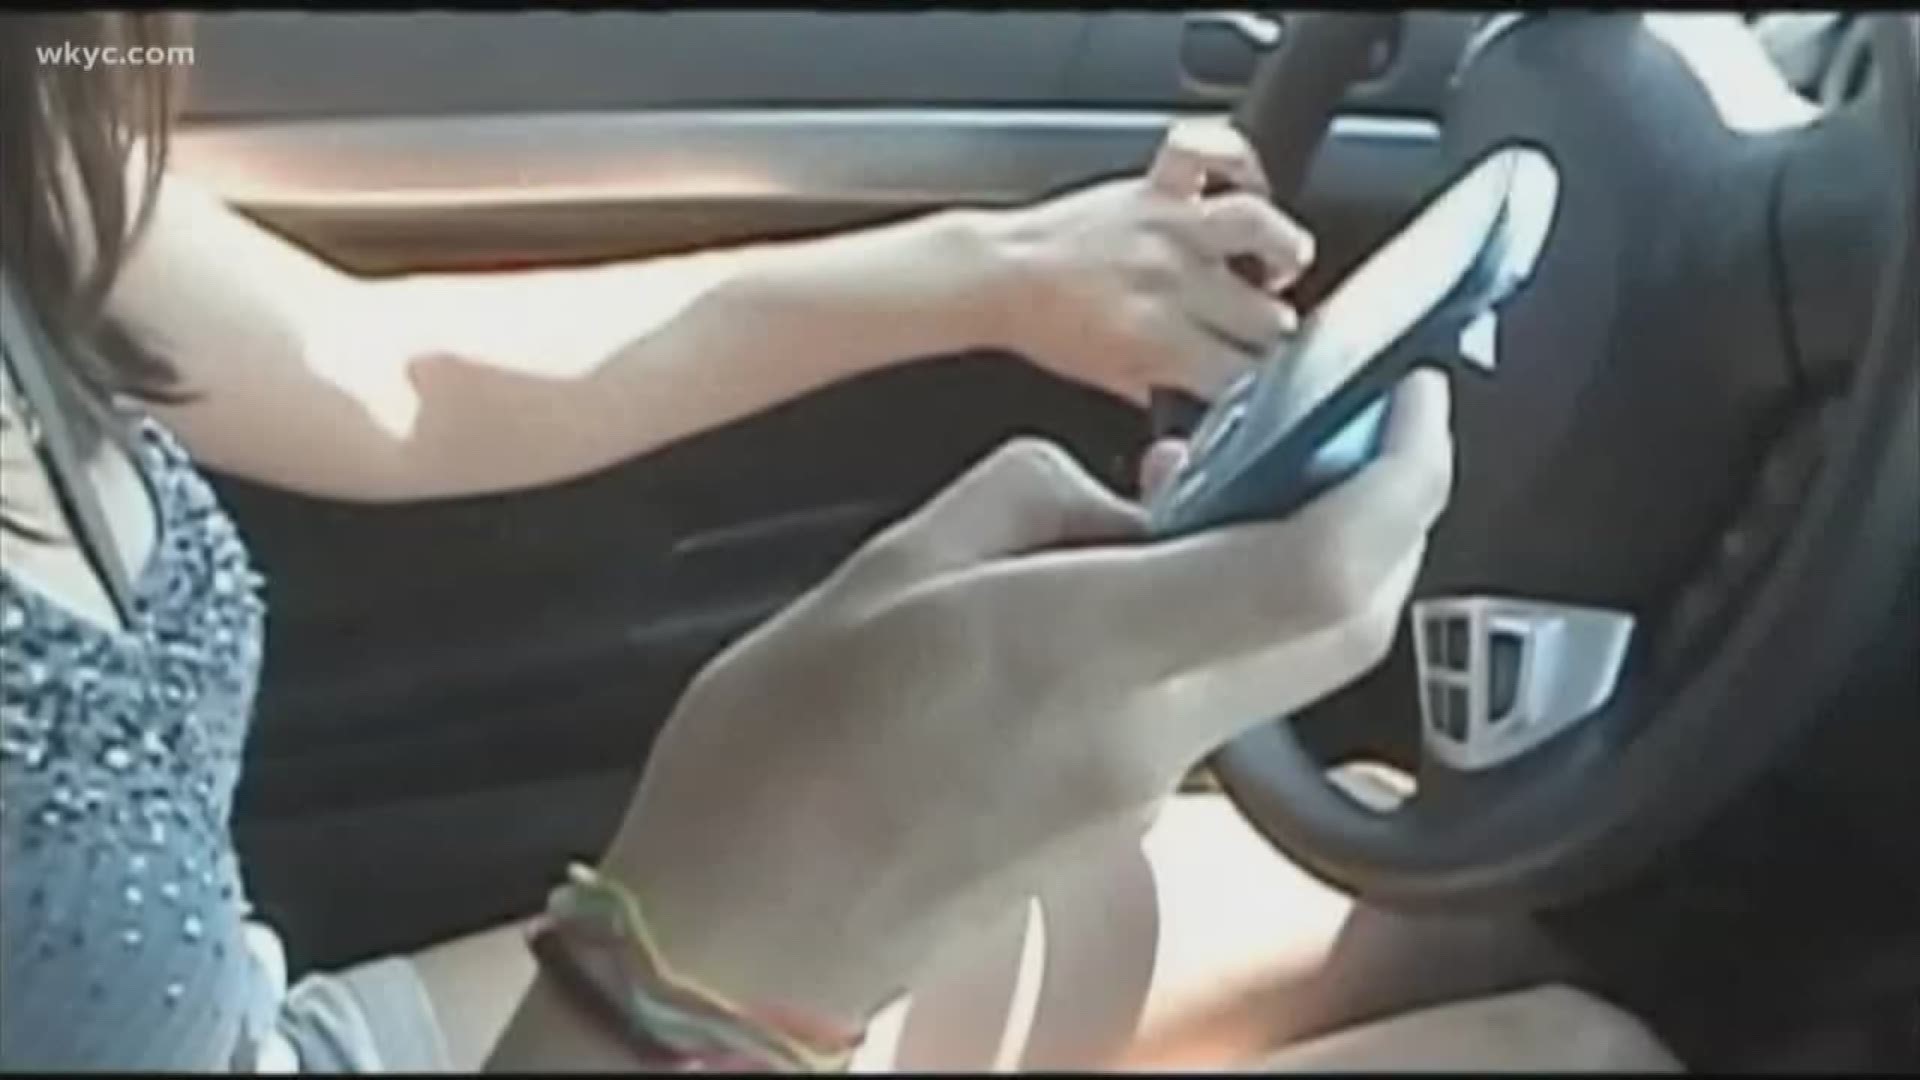 Enforcing Ohio's distracted driver law